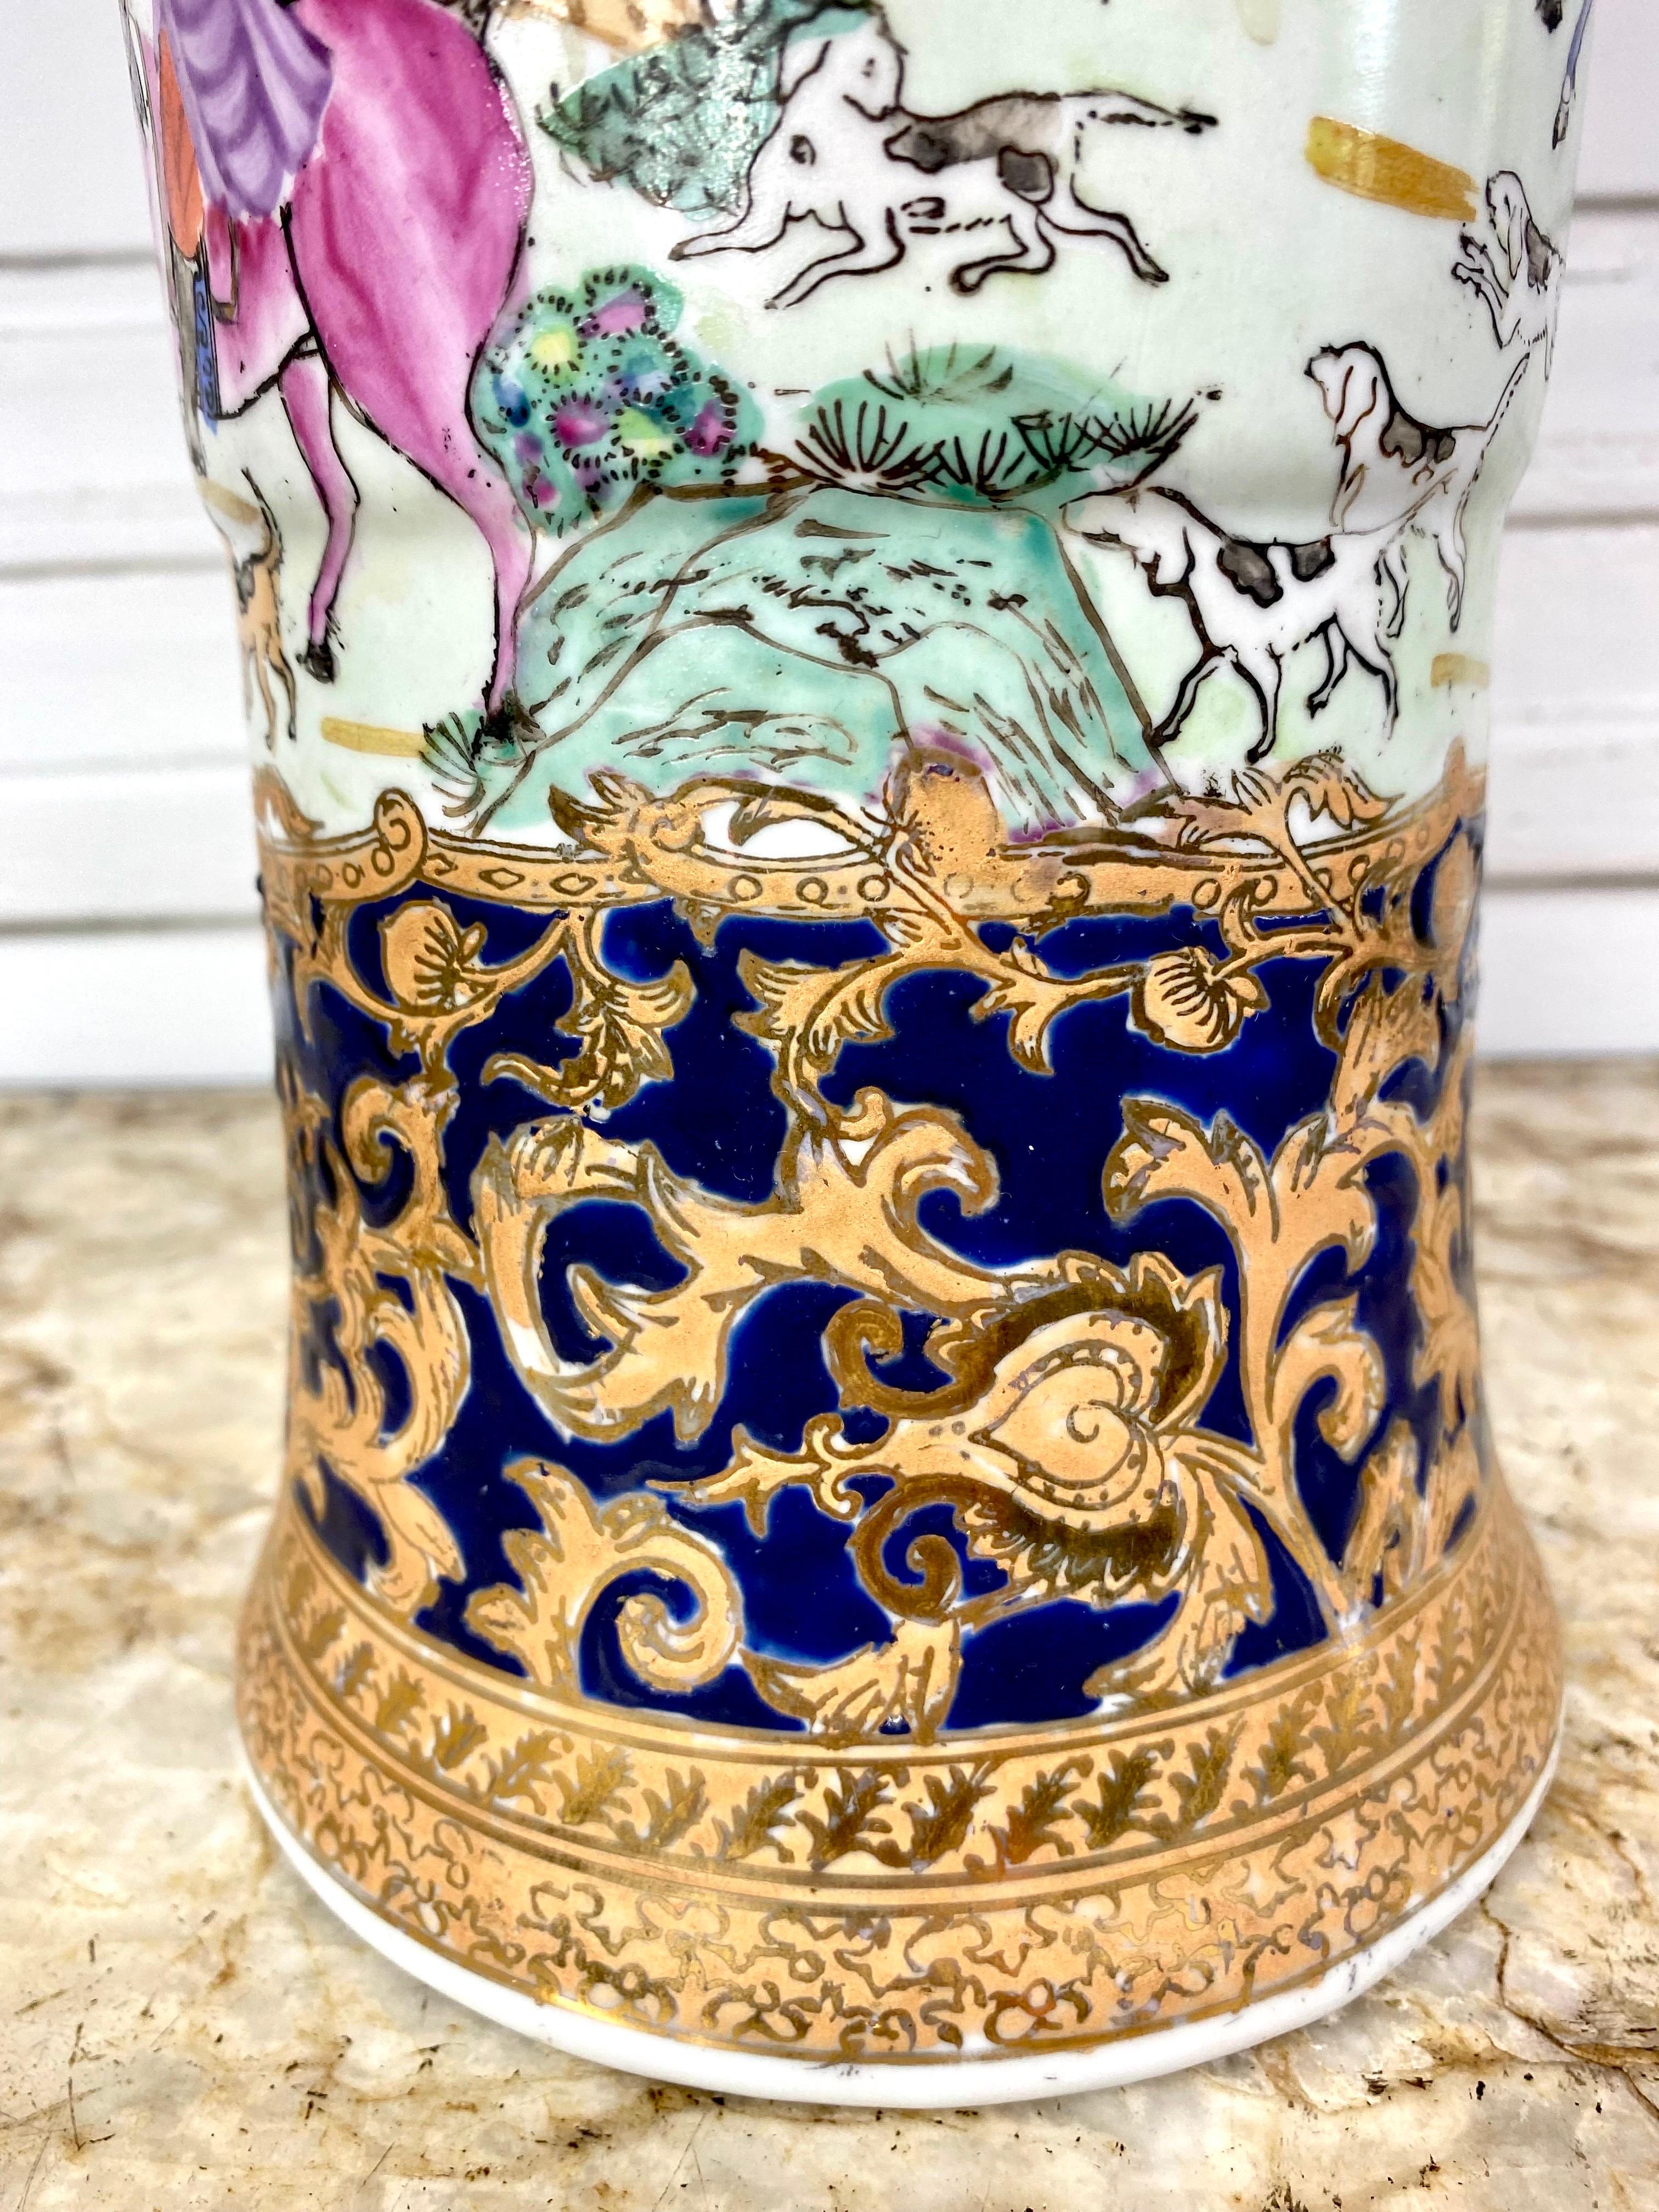 Compagnie Des Indes Porcelain Cornet Vase with Hunting Scene 19th Century, China 6